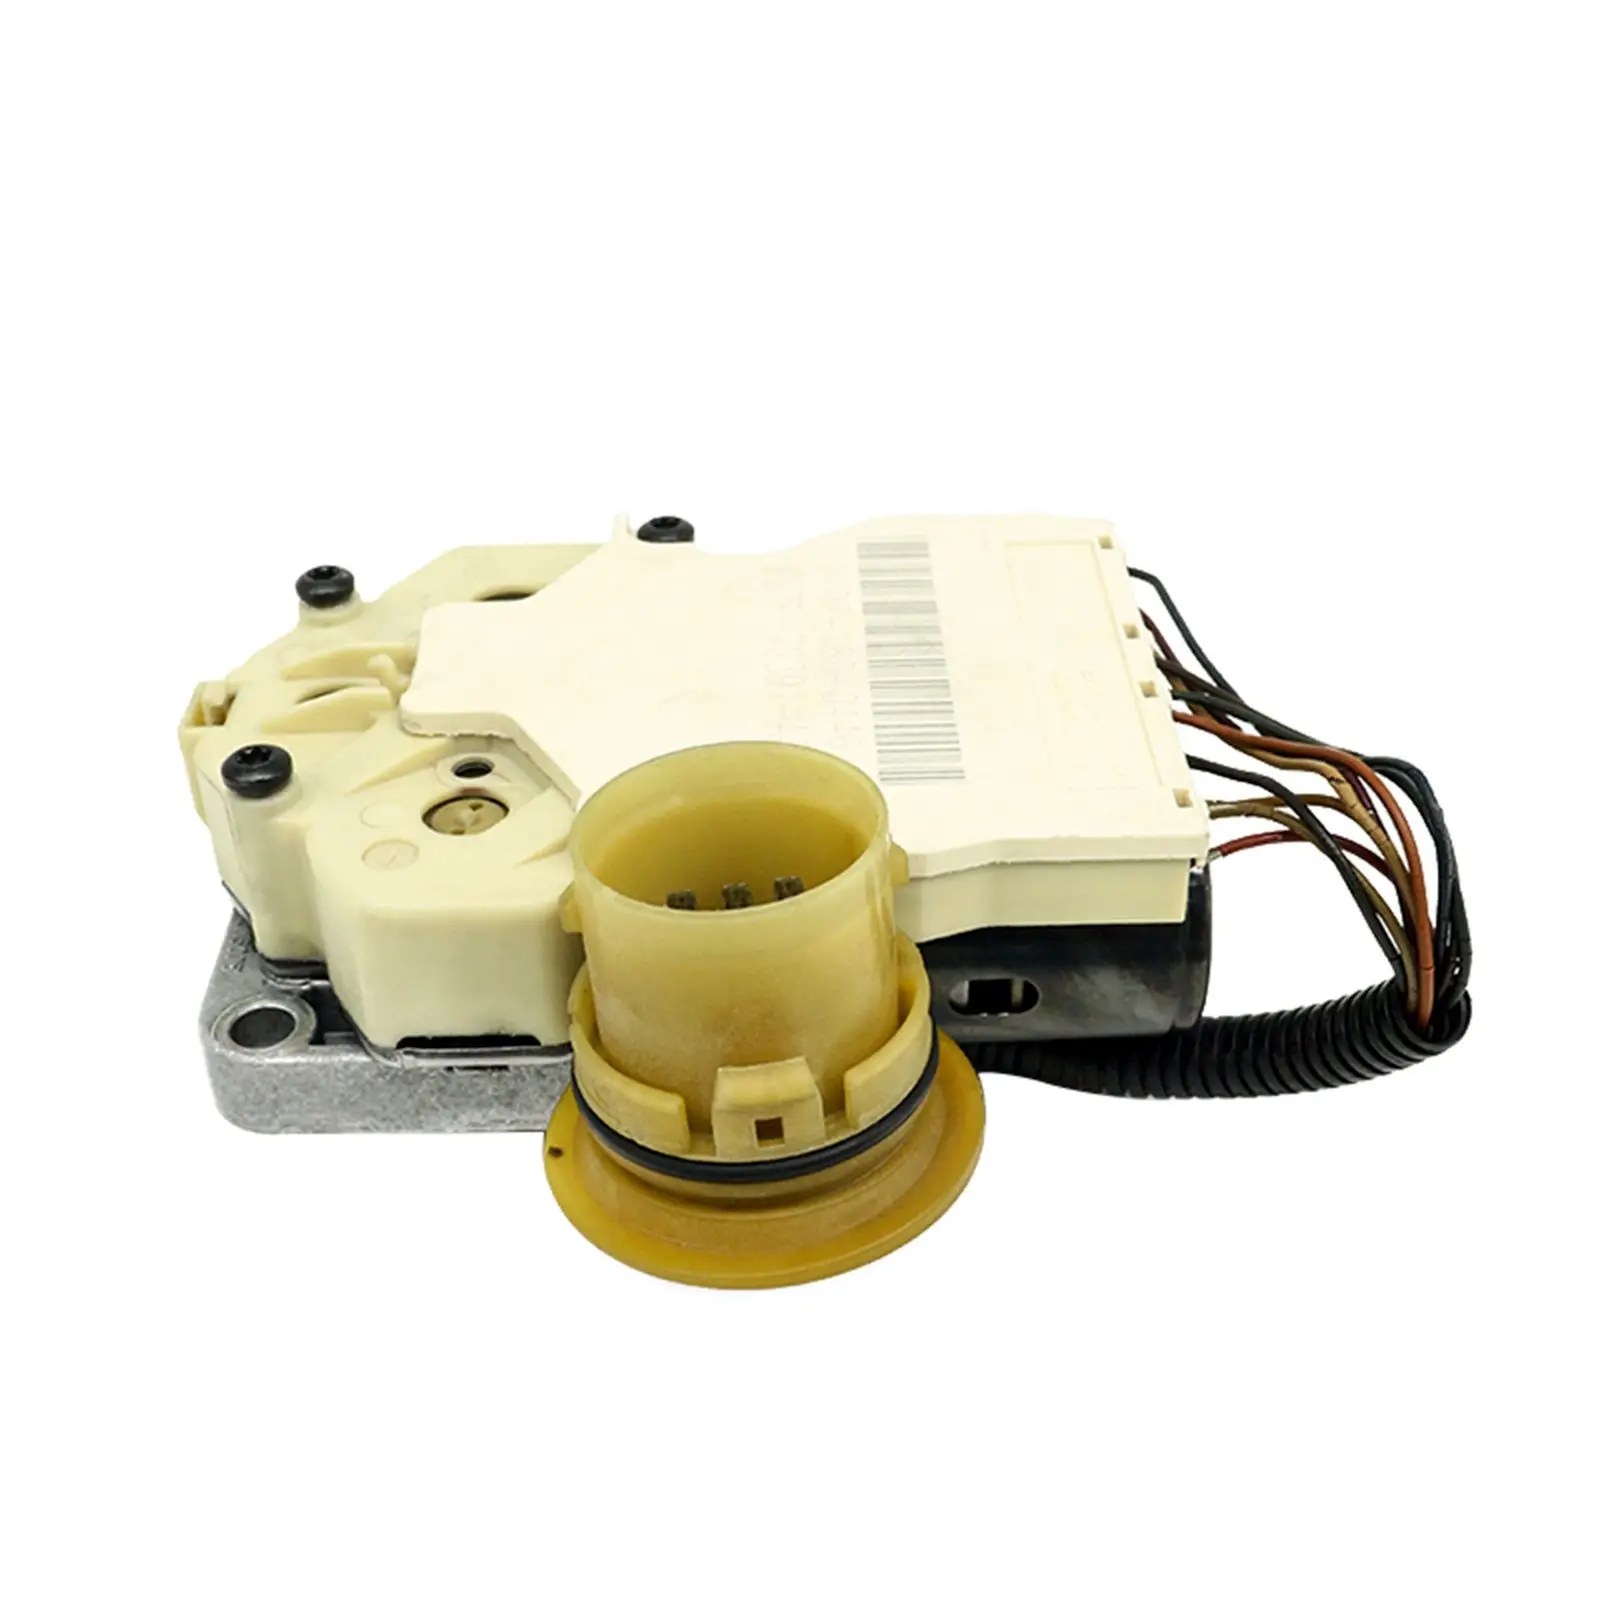 

Transmission Solenoid Pack Block F6RZ-7G391-A Replacement Fit for Probe 1994-97 L4 2.0L for Mariner 2005-08 L4 2.3L